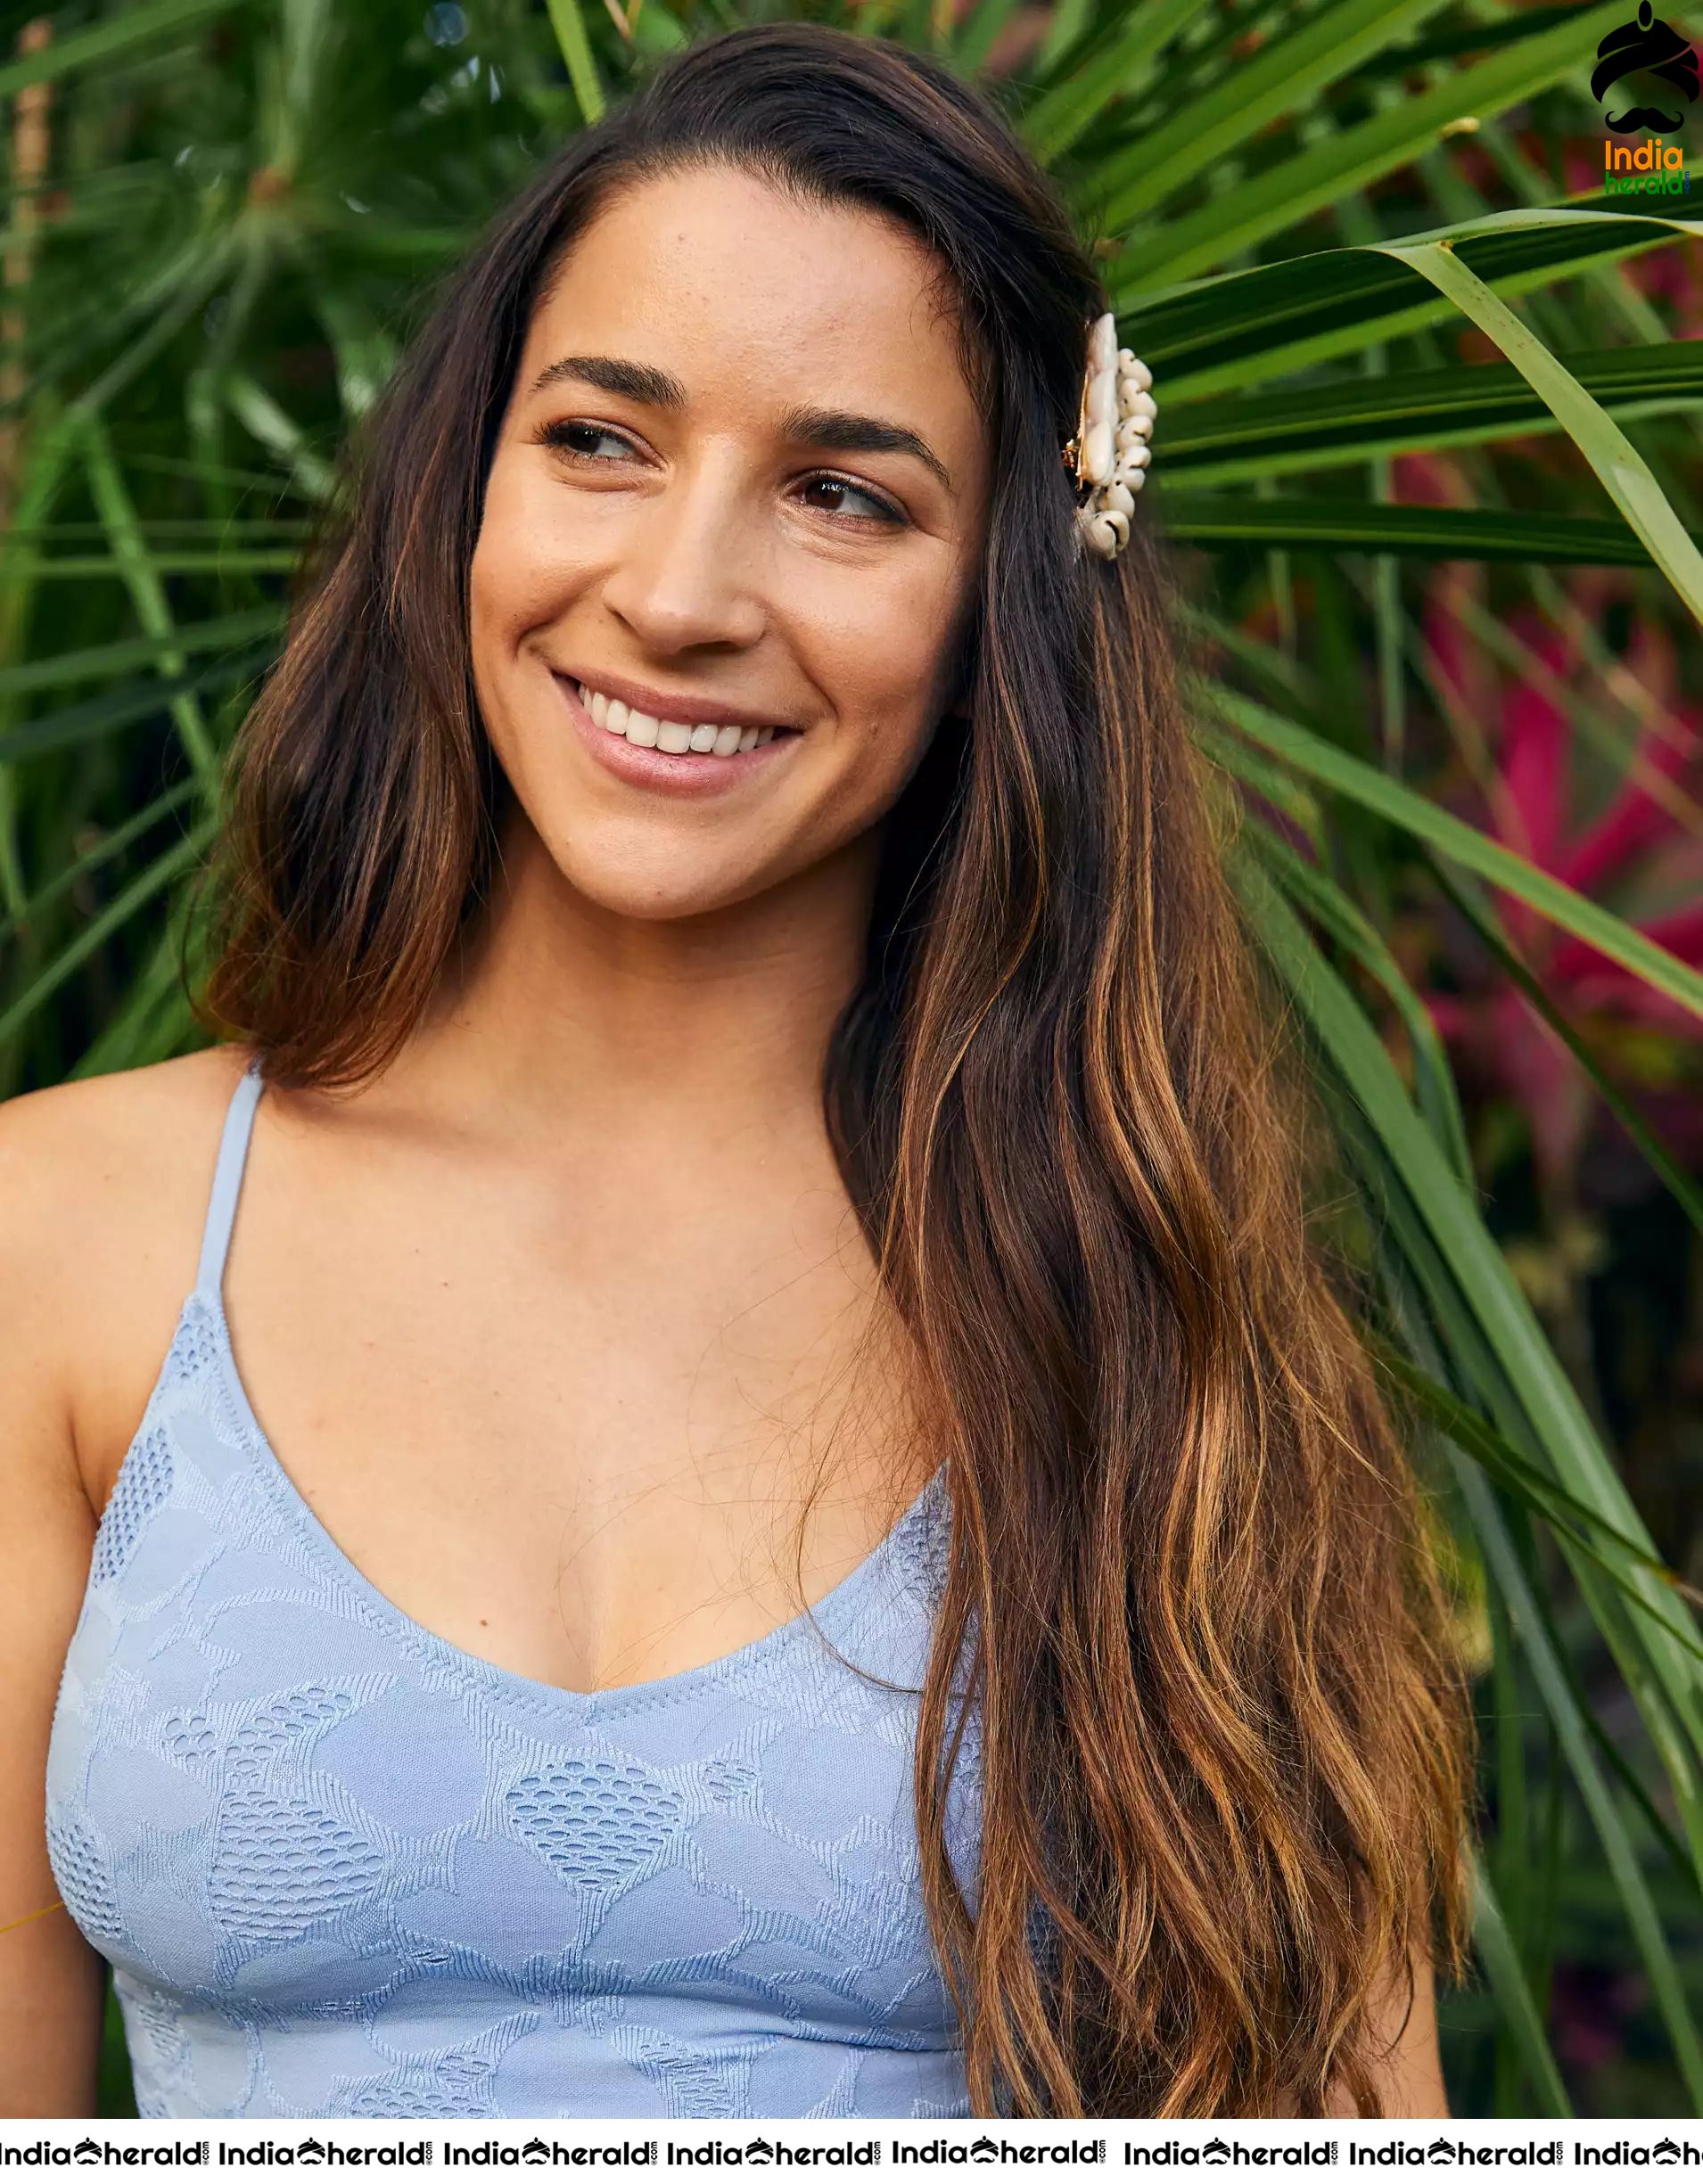 Aly Raisman Modeling Bikinis For Aeries Real Good Swimsuit Collection